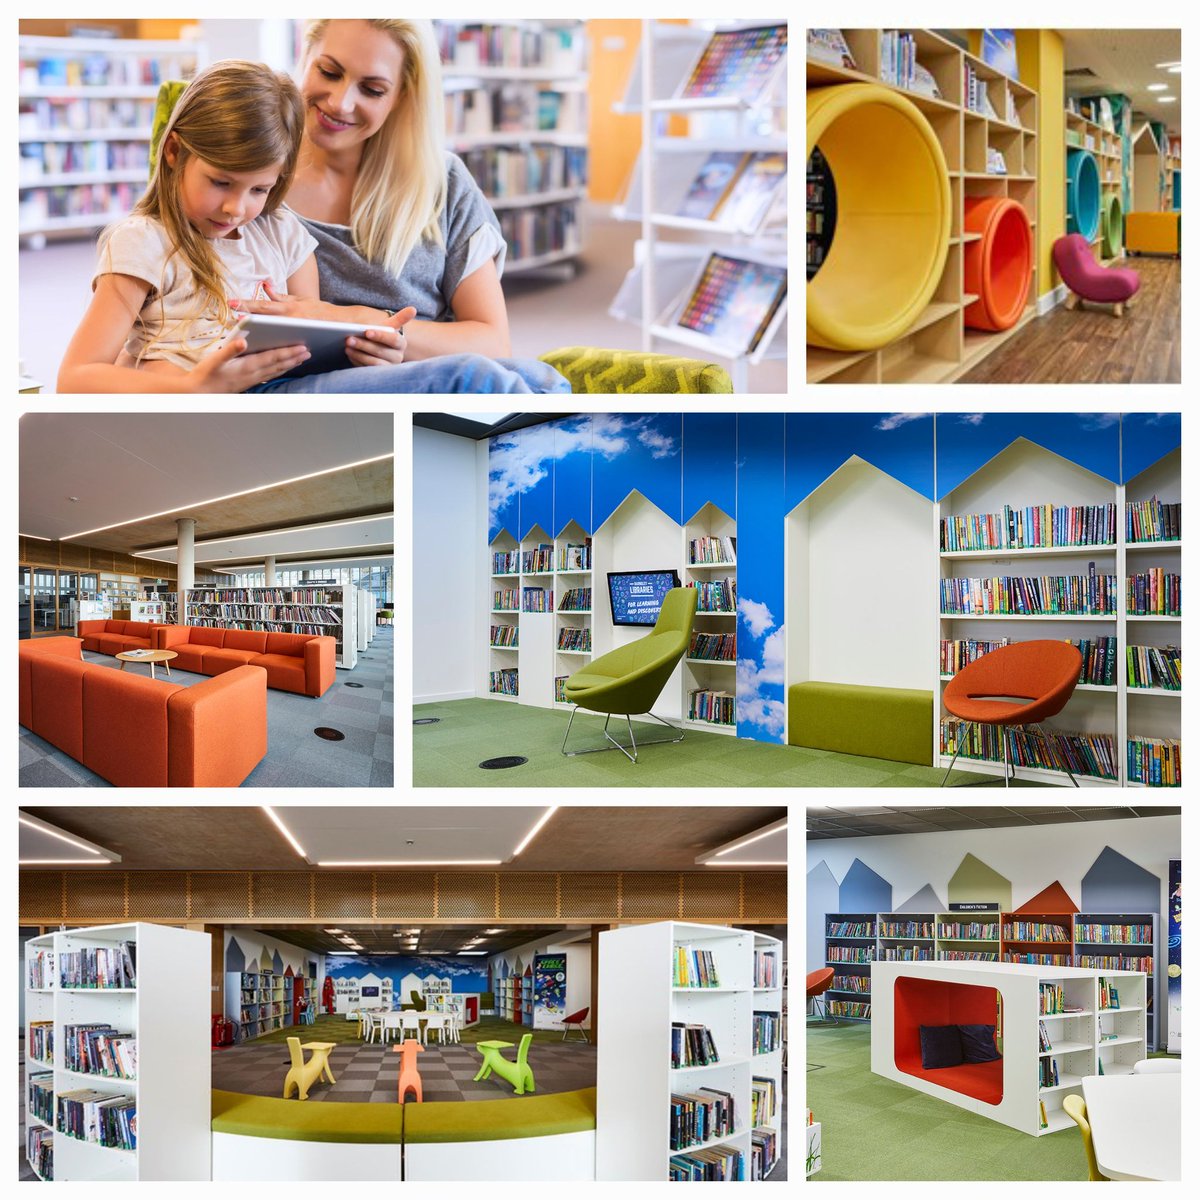 NURTURING THE NEXT GENERATION Family hub? Playful zones, spaces for storytelling, inspirational furniture to arouse curiosity, cosy family seating, teen spaces, prams #libraries #kids #reading #PCbabycaŕrel #familyhub #librarydesign #childrenslibraries Time to talk?